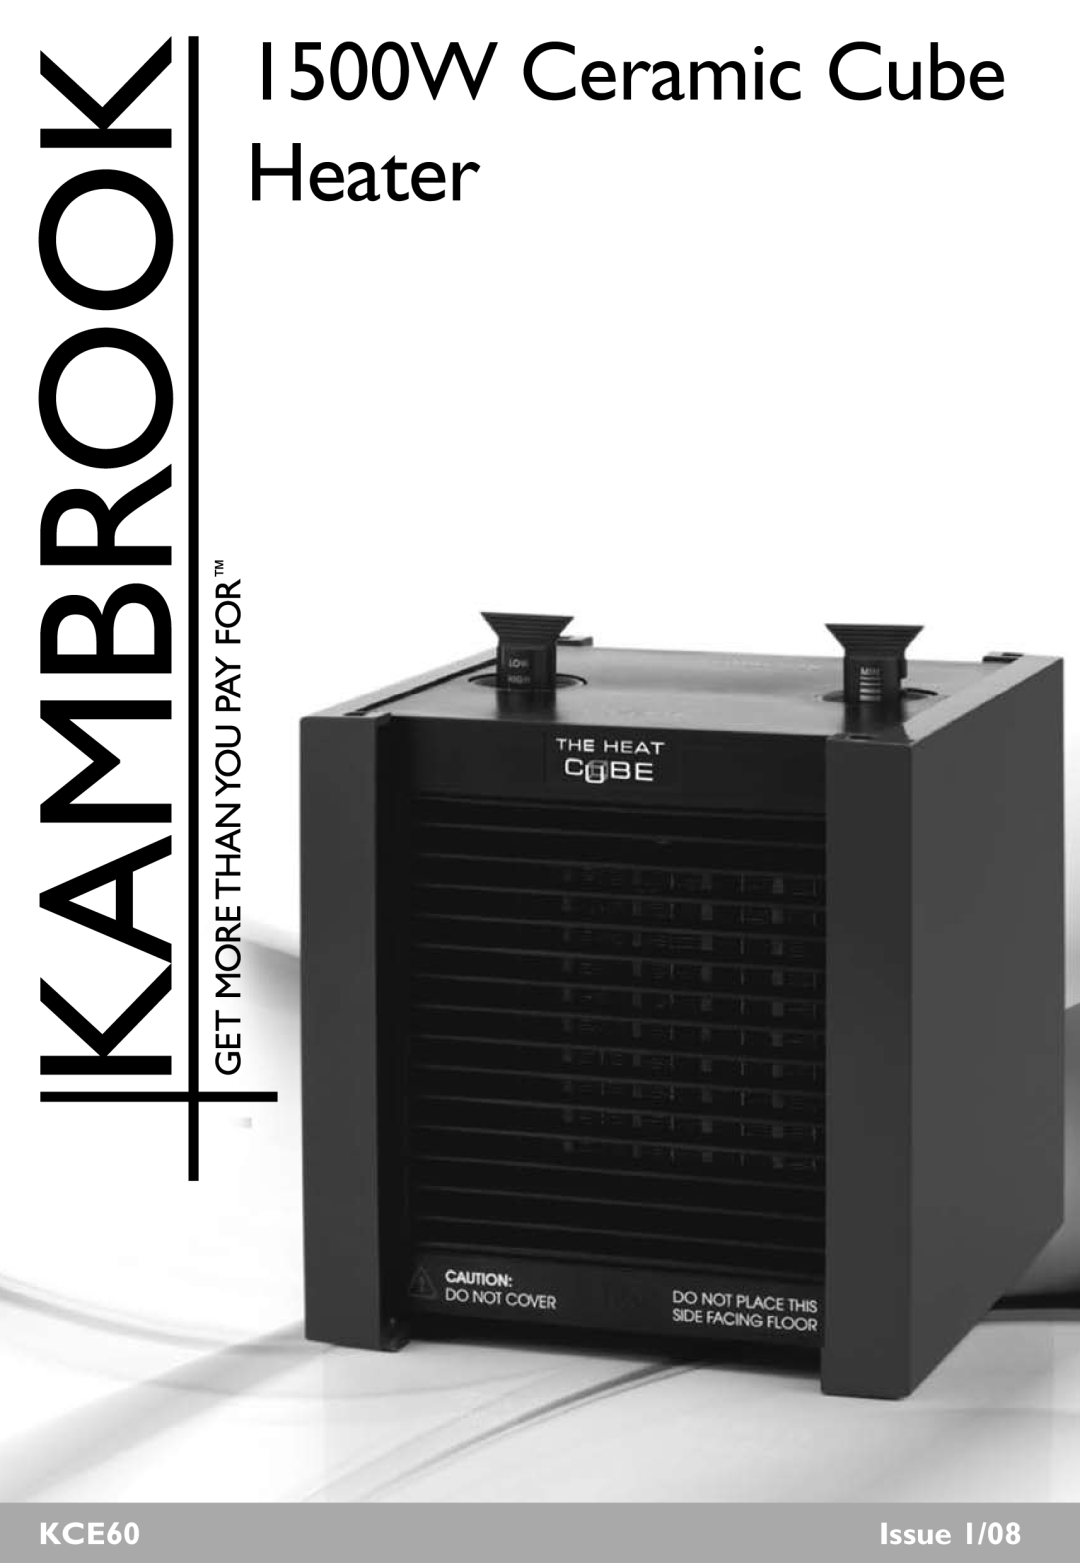 Kambrook KCE60 manual 1500W Ceramic Cube Heater, Issue 1/08 